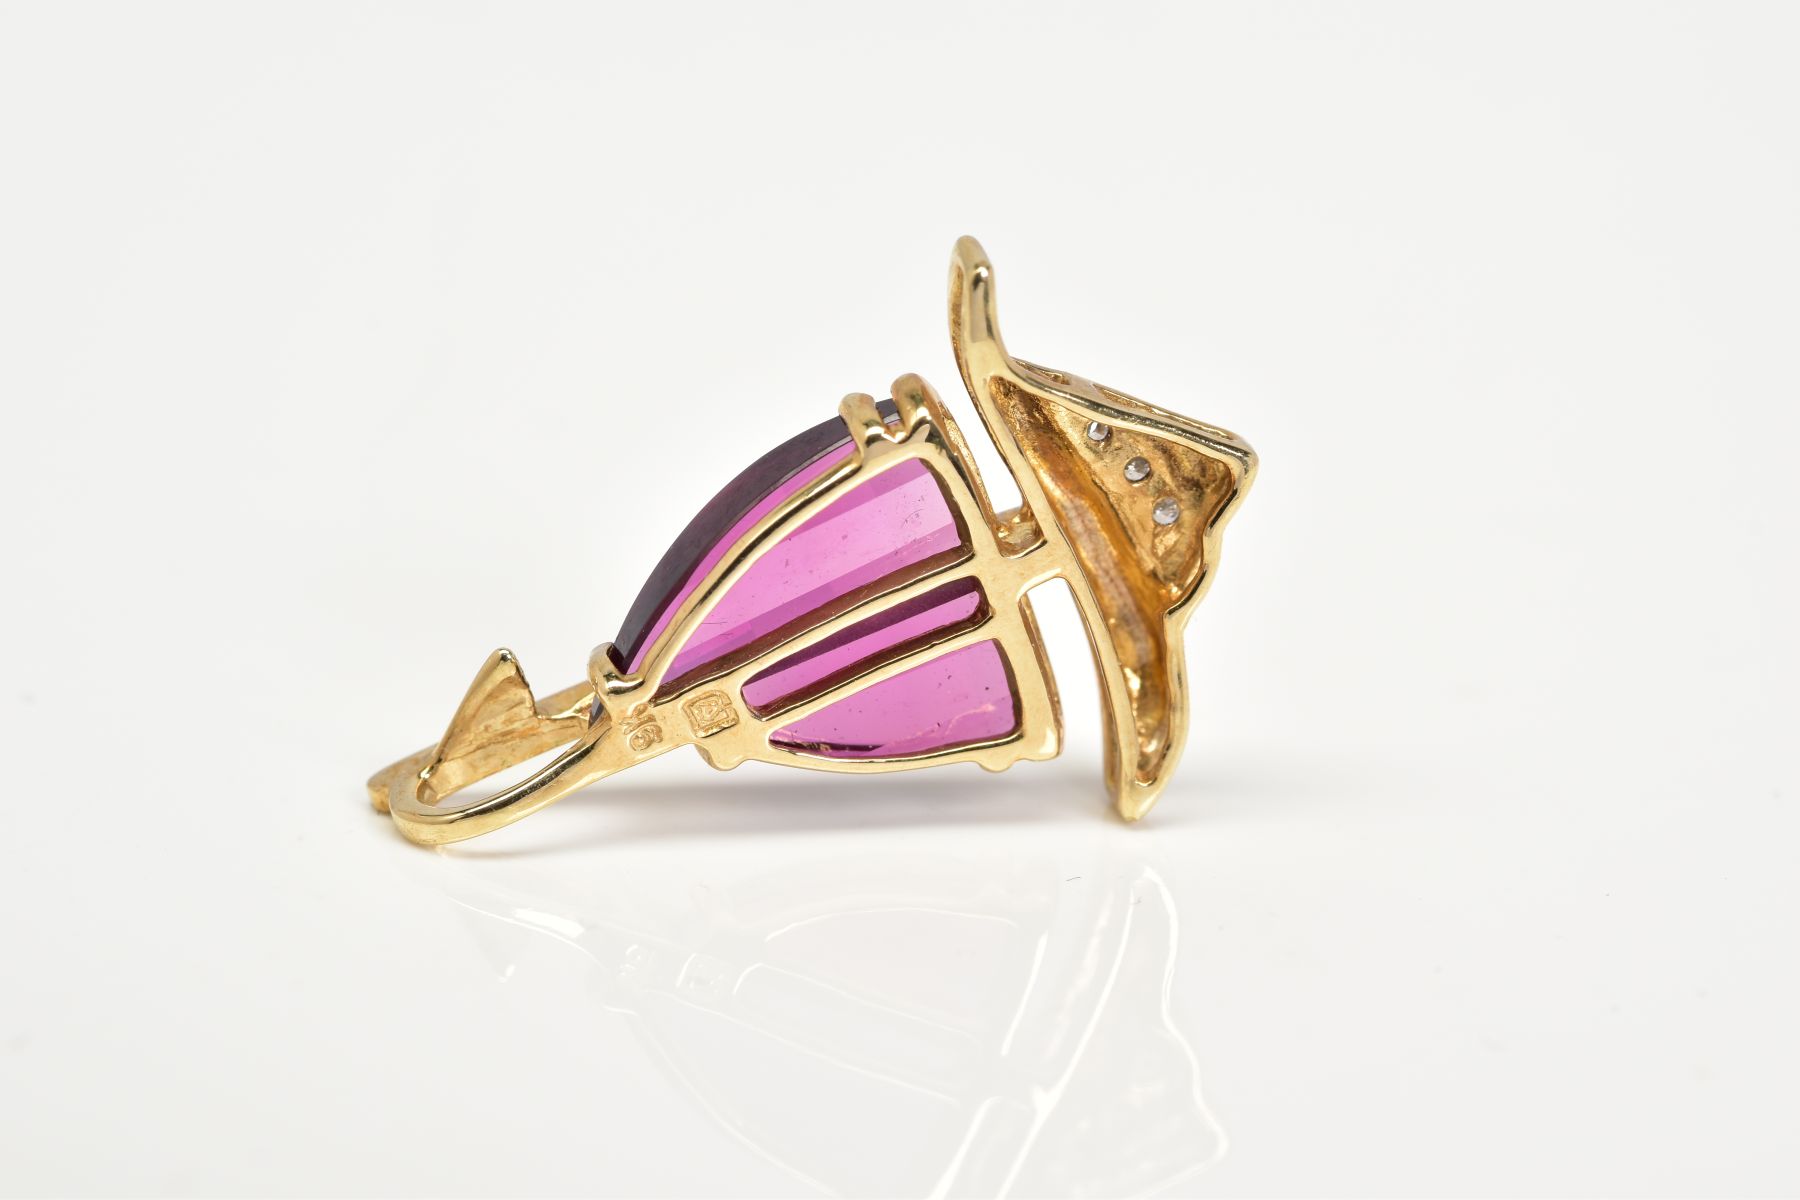 AN AMETHYST AND DIAMOND PENDANT, the yellow metal pendant in the form of a yacht, set with garnet - Image 2 of 3